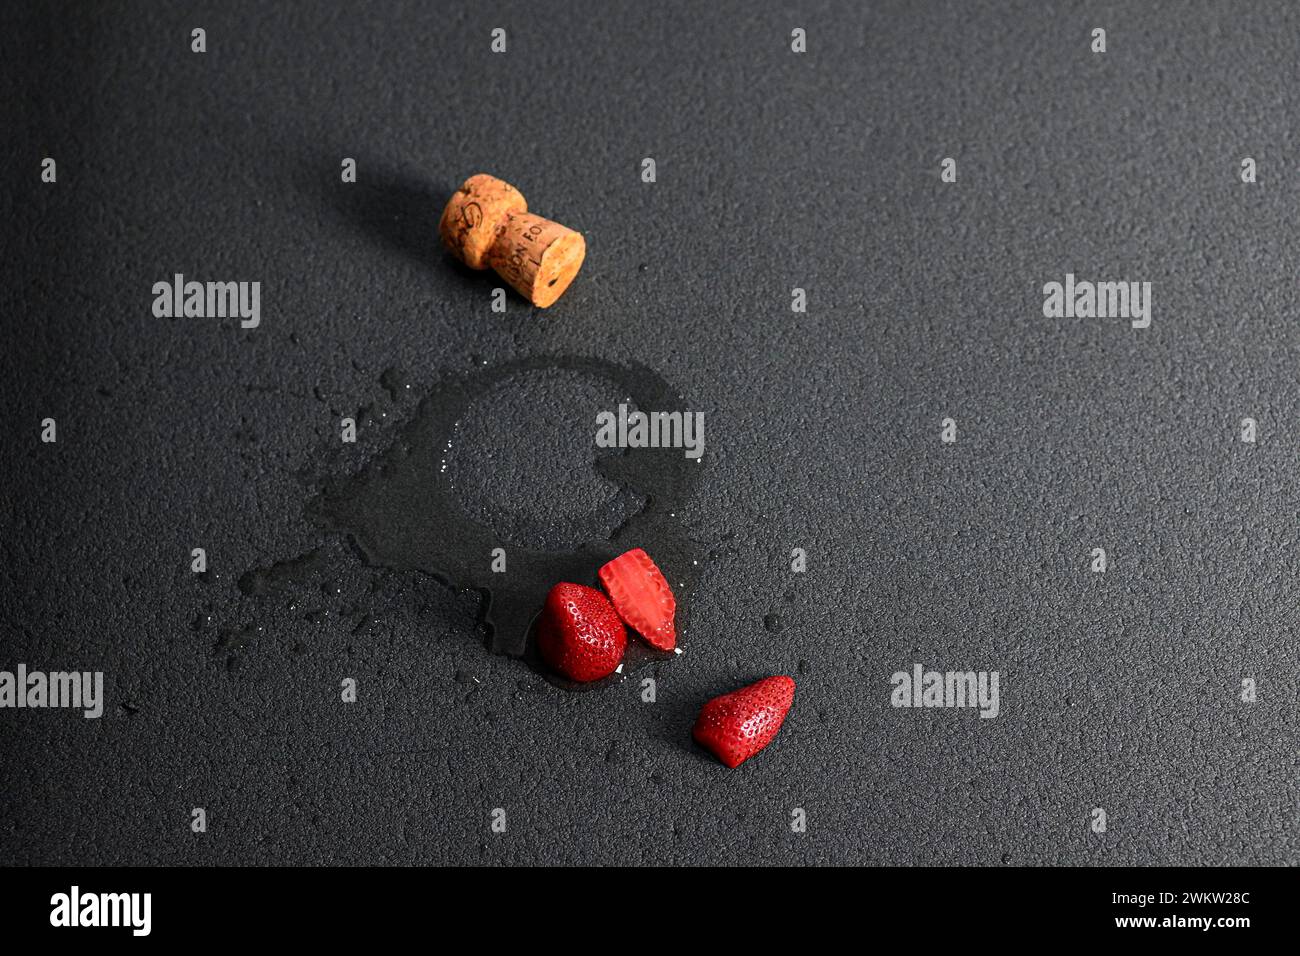 spilled wine with cork and strawberries on black background, side view. Stock Photo